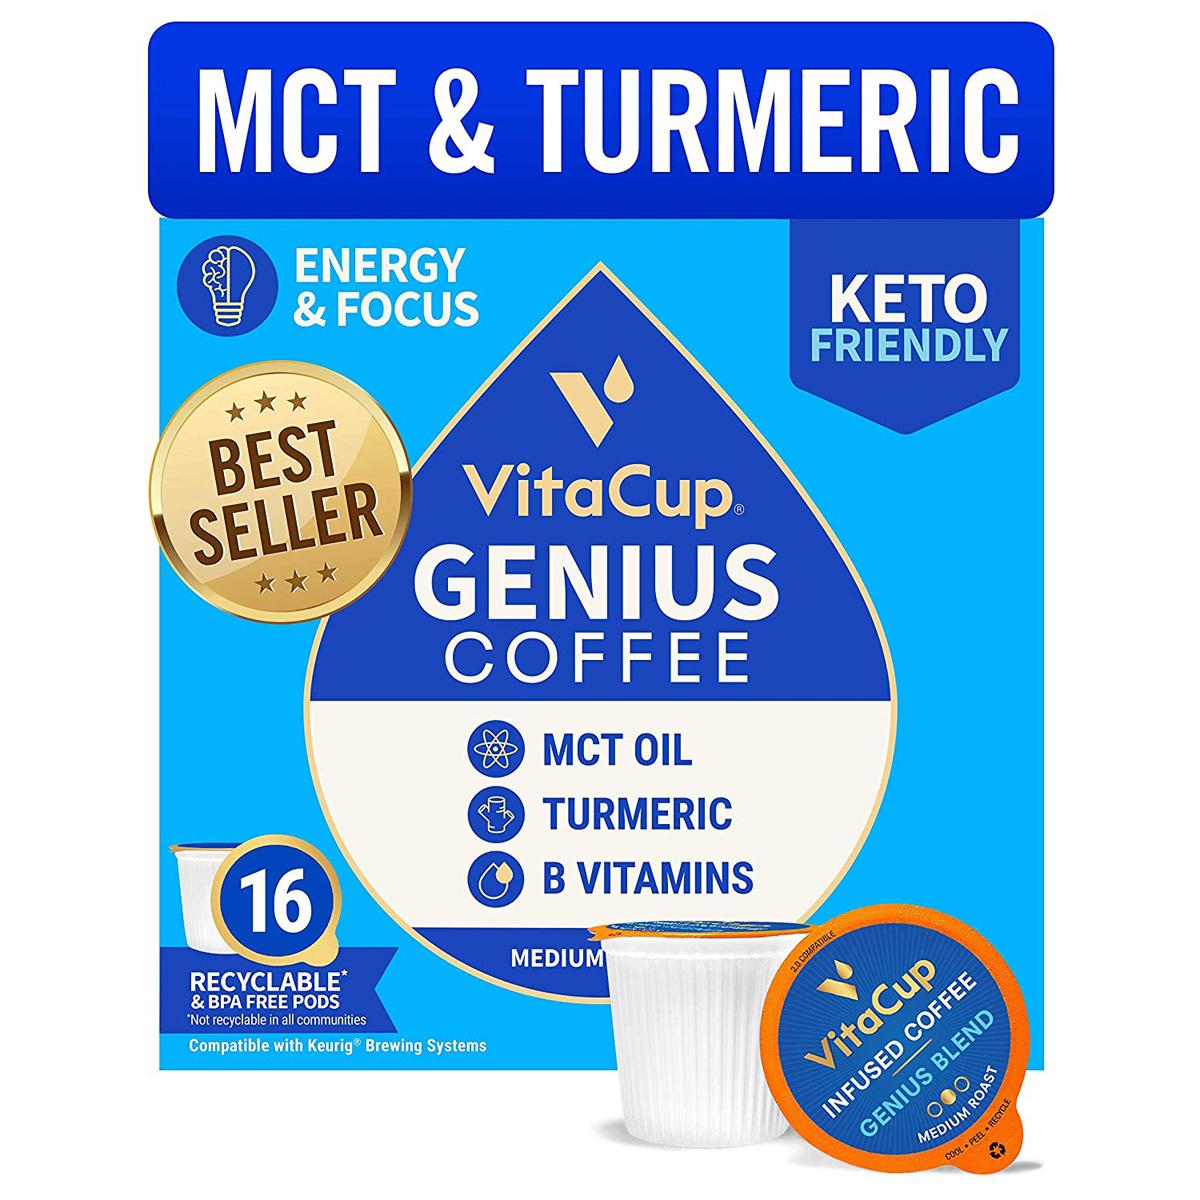 16 Vitacup Genius Keto Coffee K-Cup Pods for $15.25 Shipped